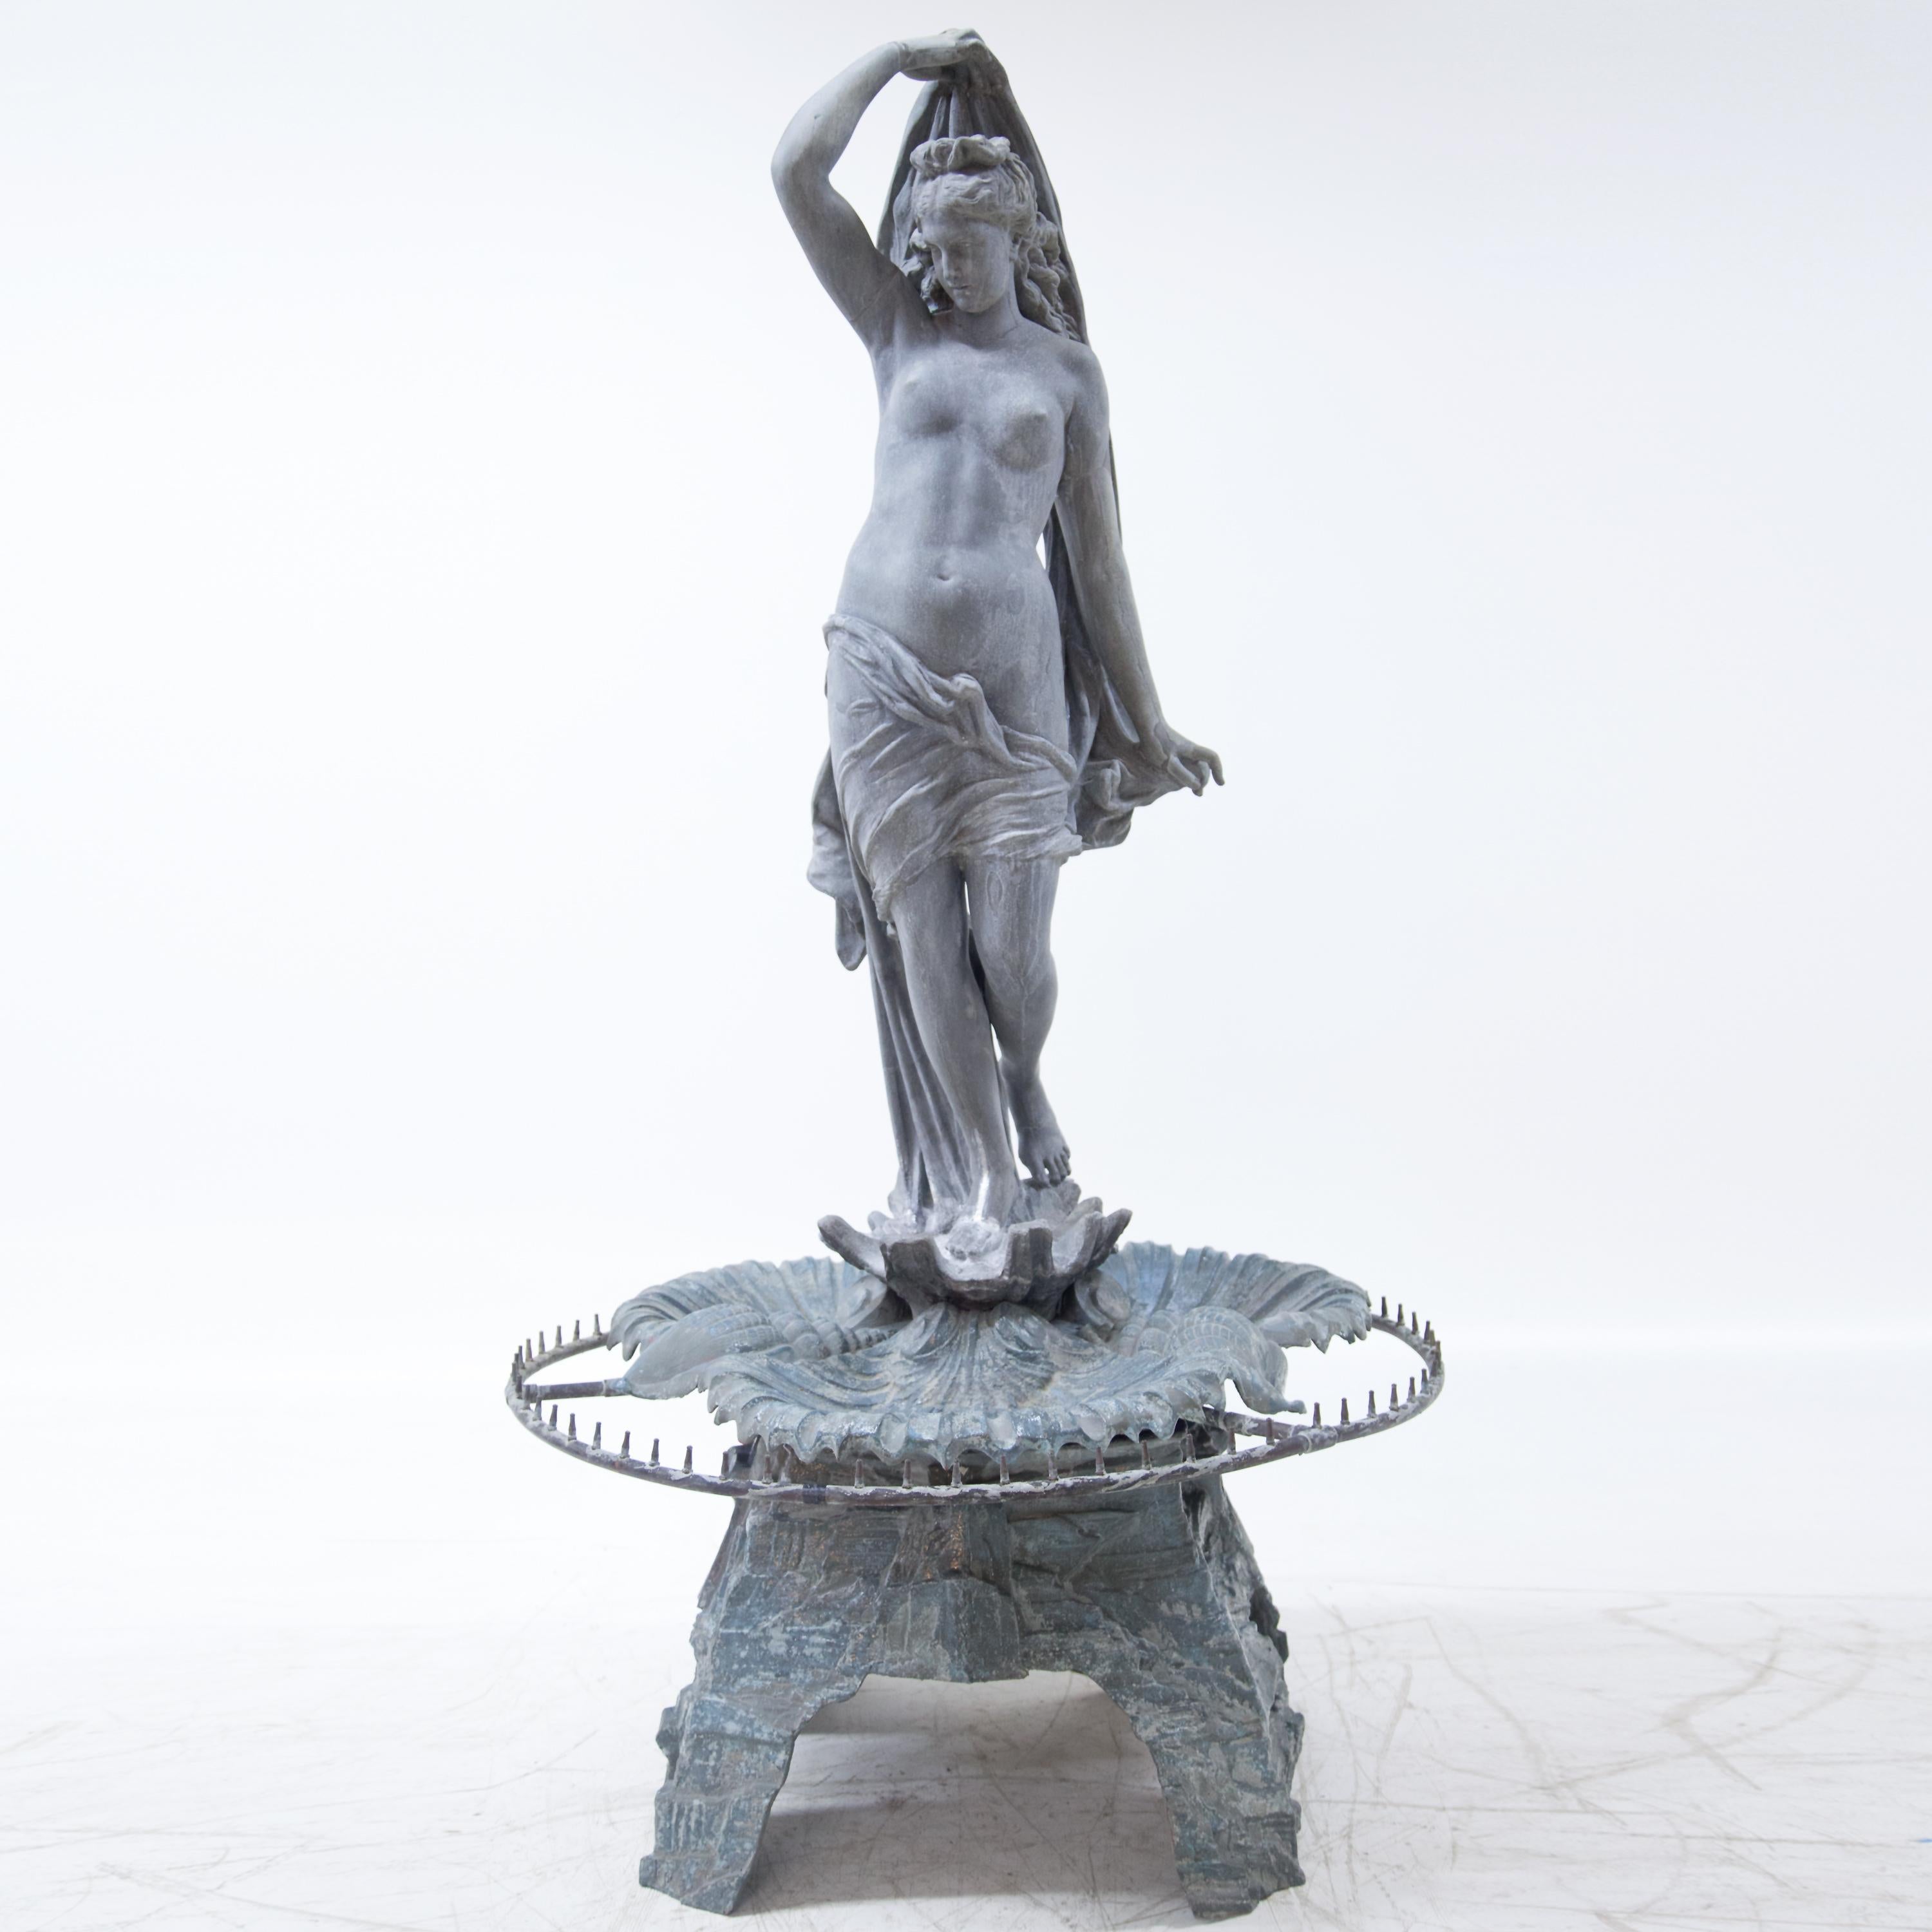 Large zinc fountain with life-size representation of Venus (h: 155cm) on stylized rock base with fountain wreath. The fountain was made 1880 by J. L. Mott Iron Works in New York and stood until 1986 at the corner 8th & Hall, St. Joseph, Missouri. In